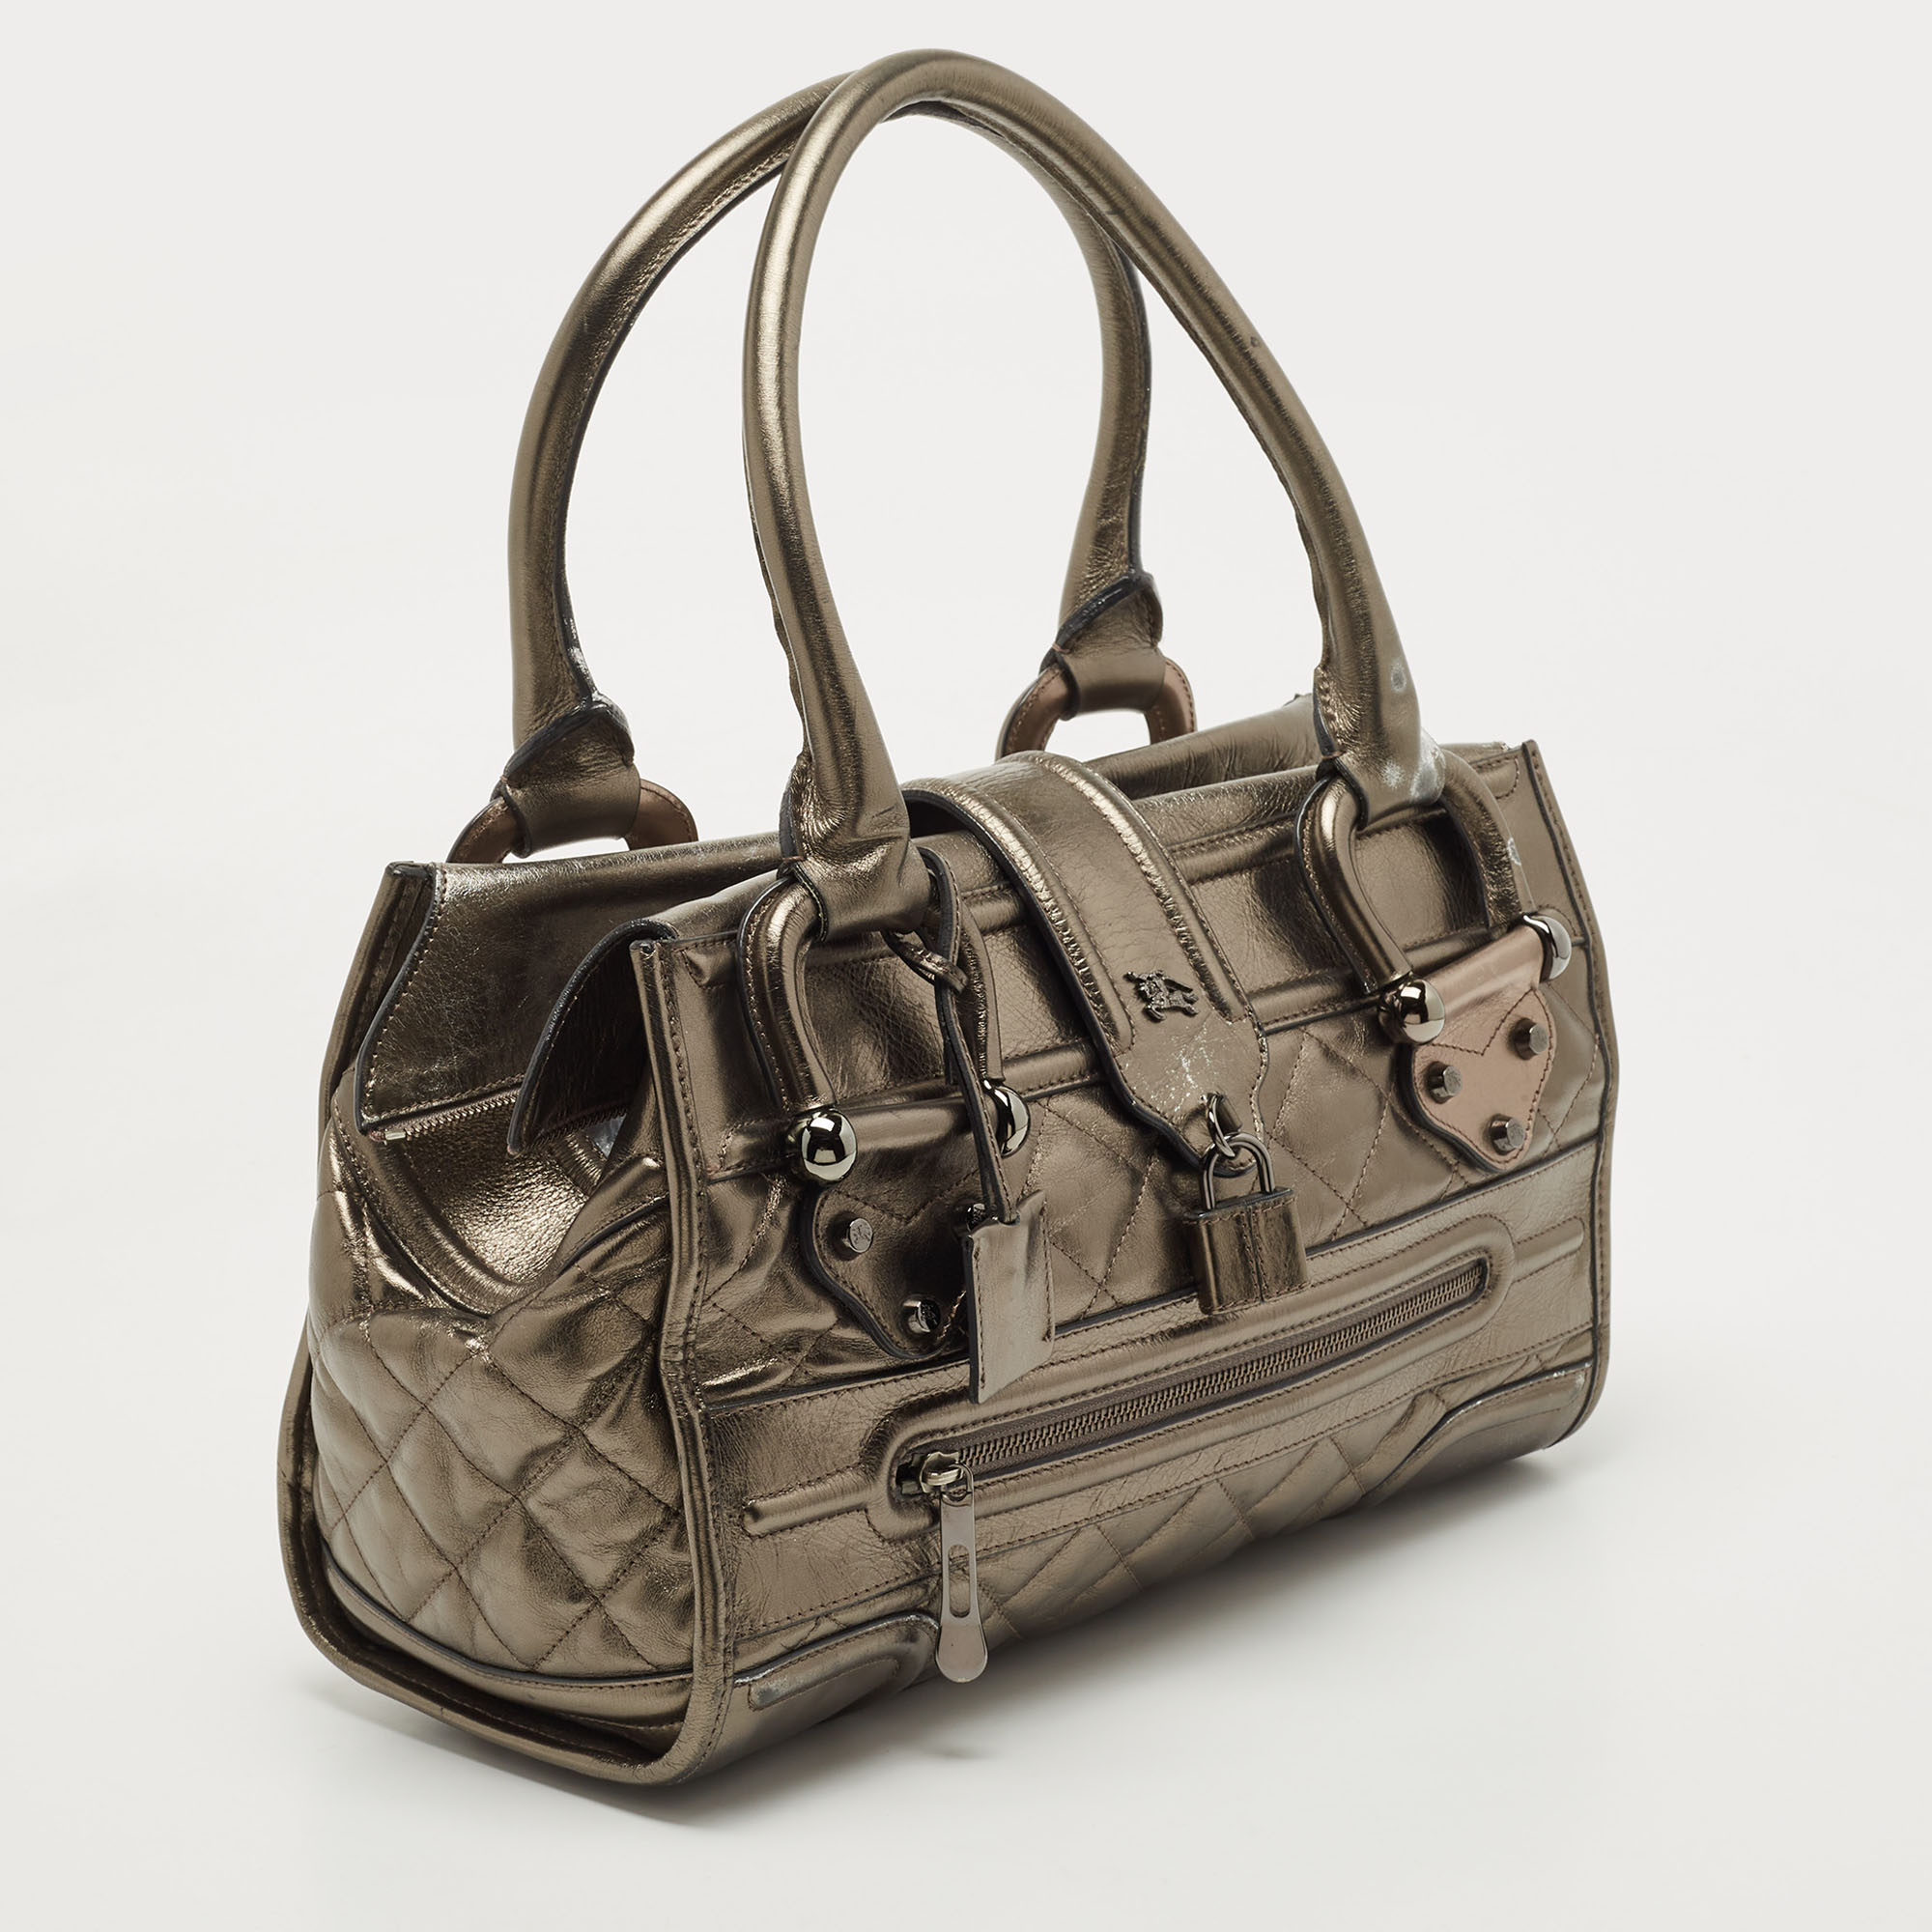 Burberry Metallic Quilted Leather Manor Satchel